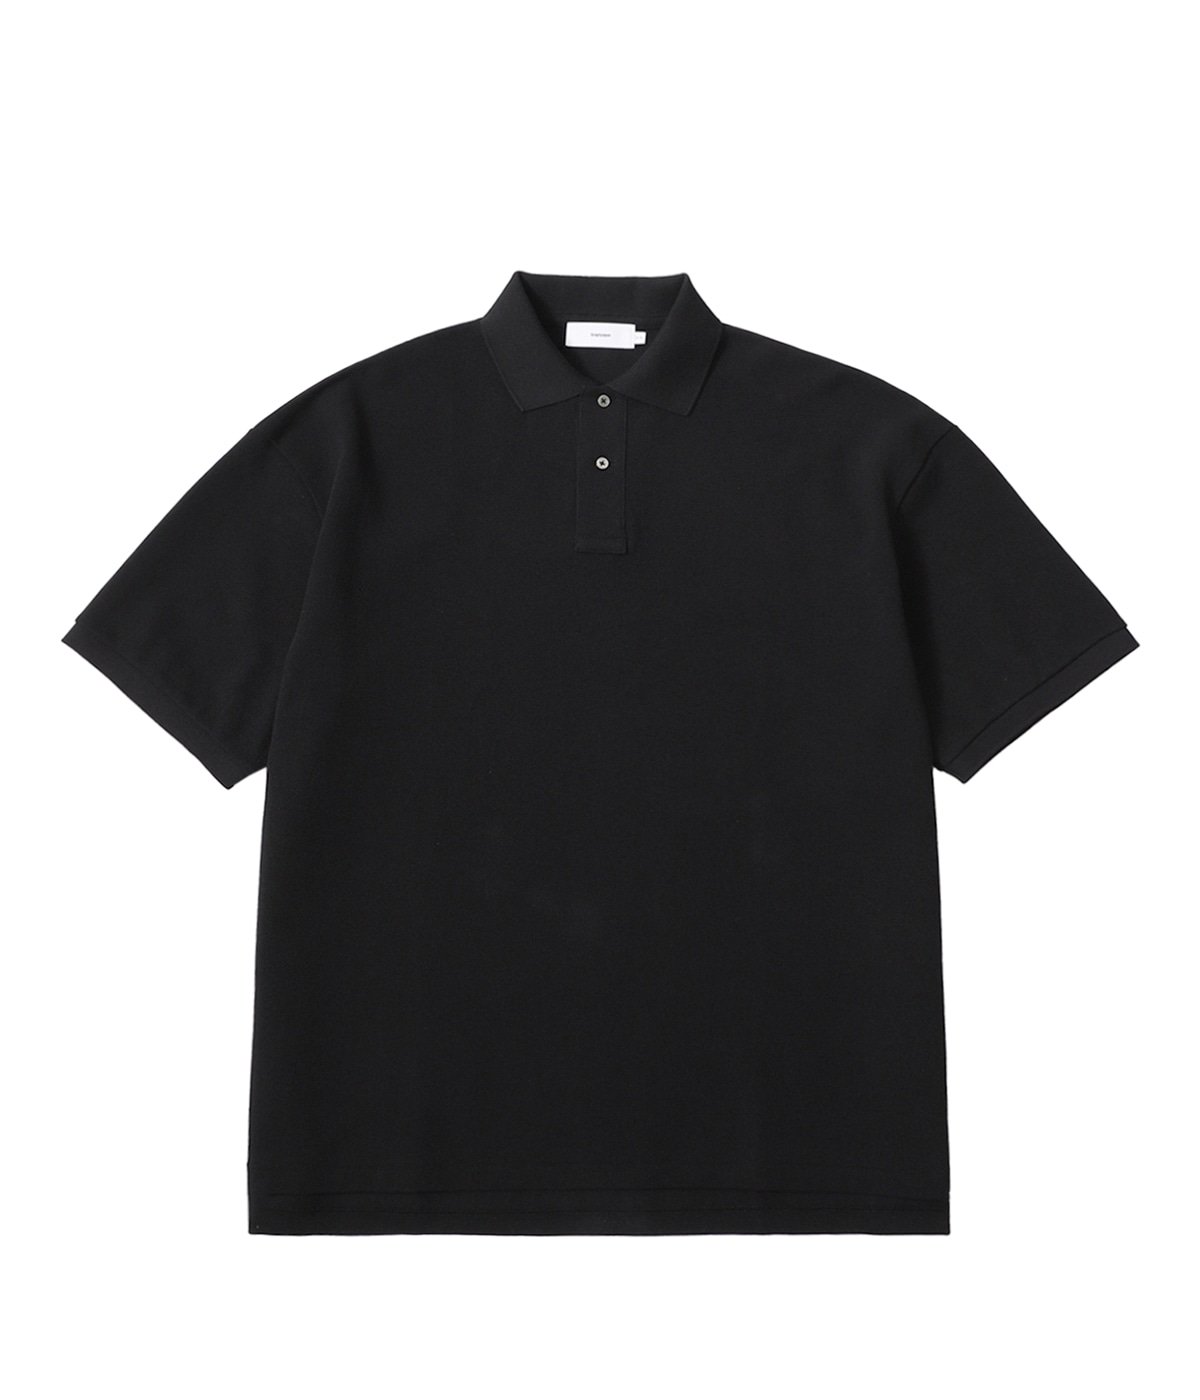 ONLY ARK】別注 Cotton Pique Jersey S/S Polo | Graphpaper(グラフ 